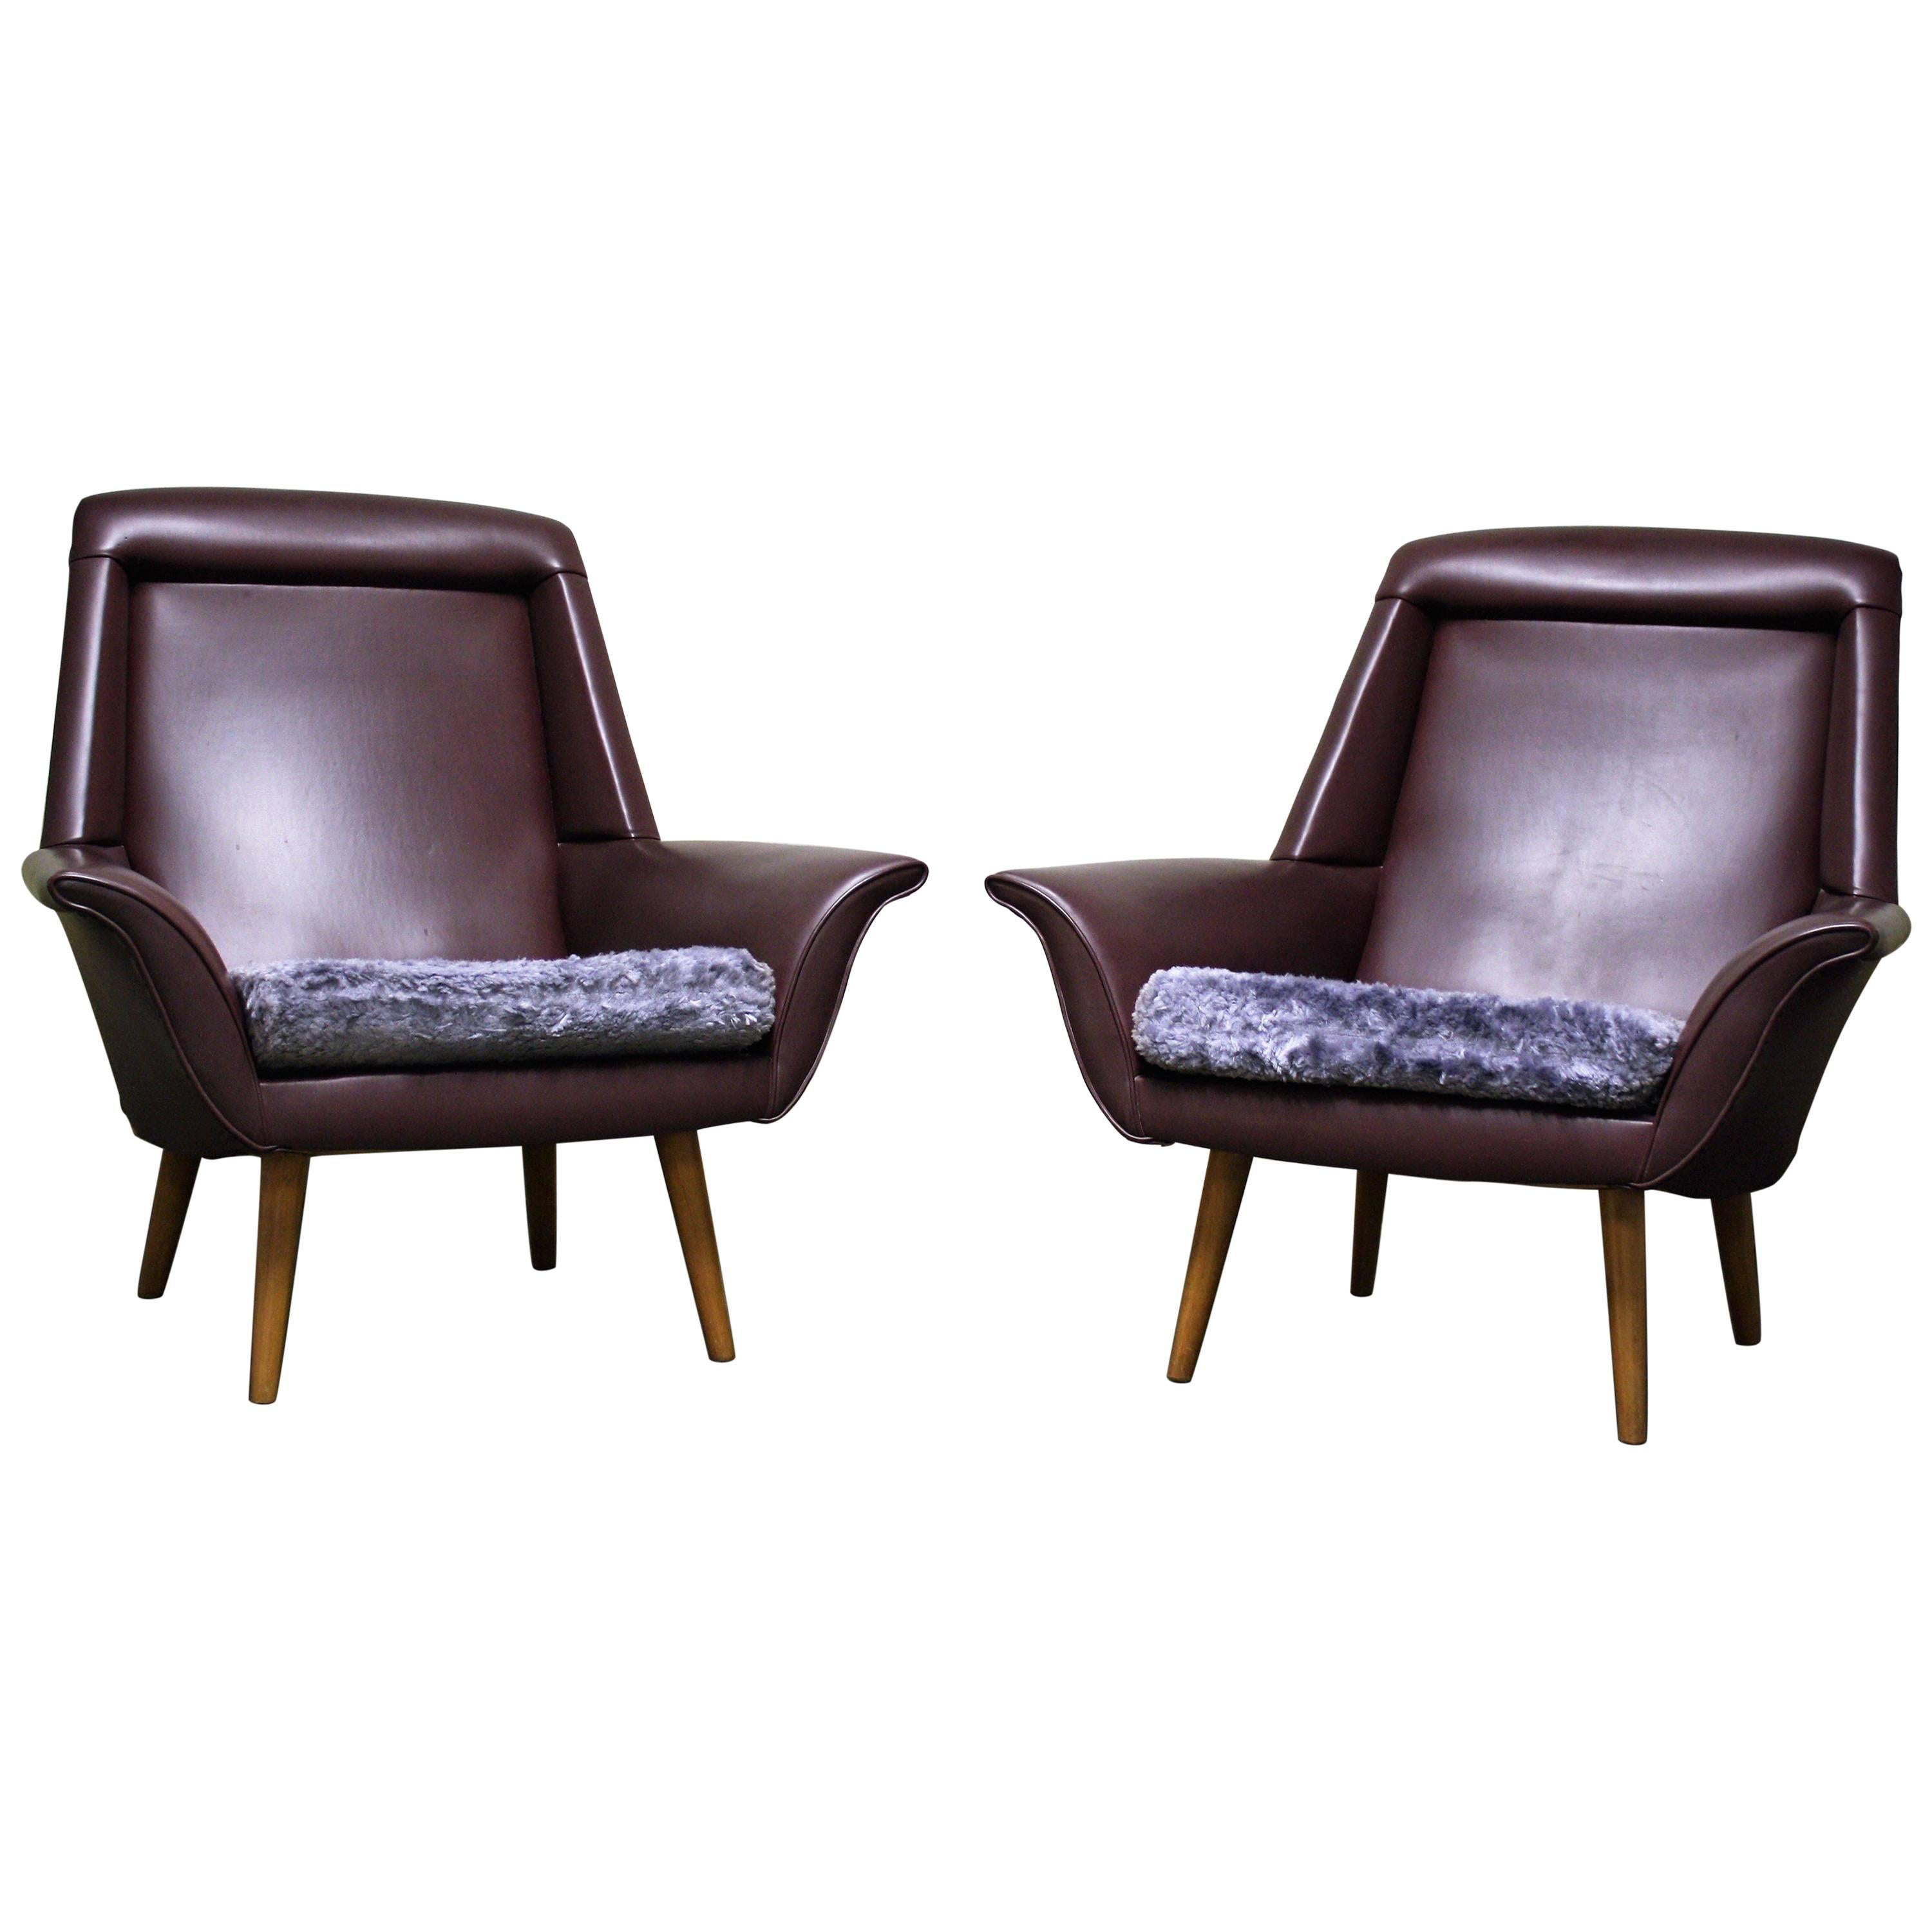 Pair of Vintage Purple Cocktail Chairs, 1960s